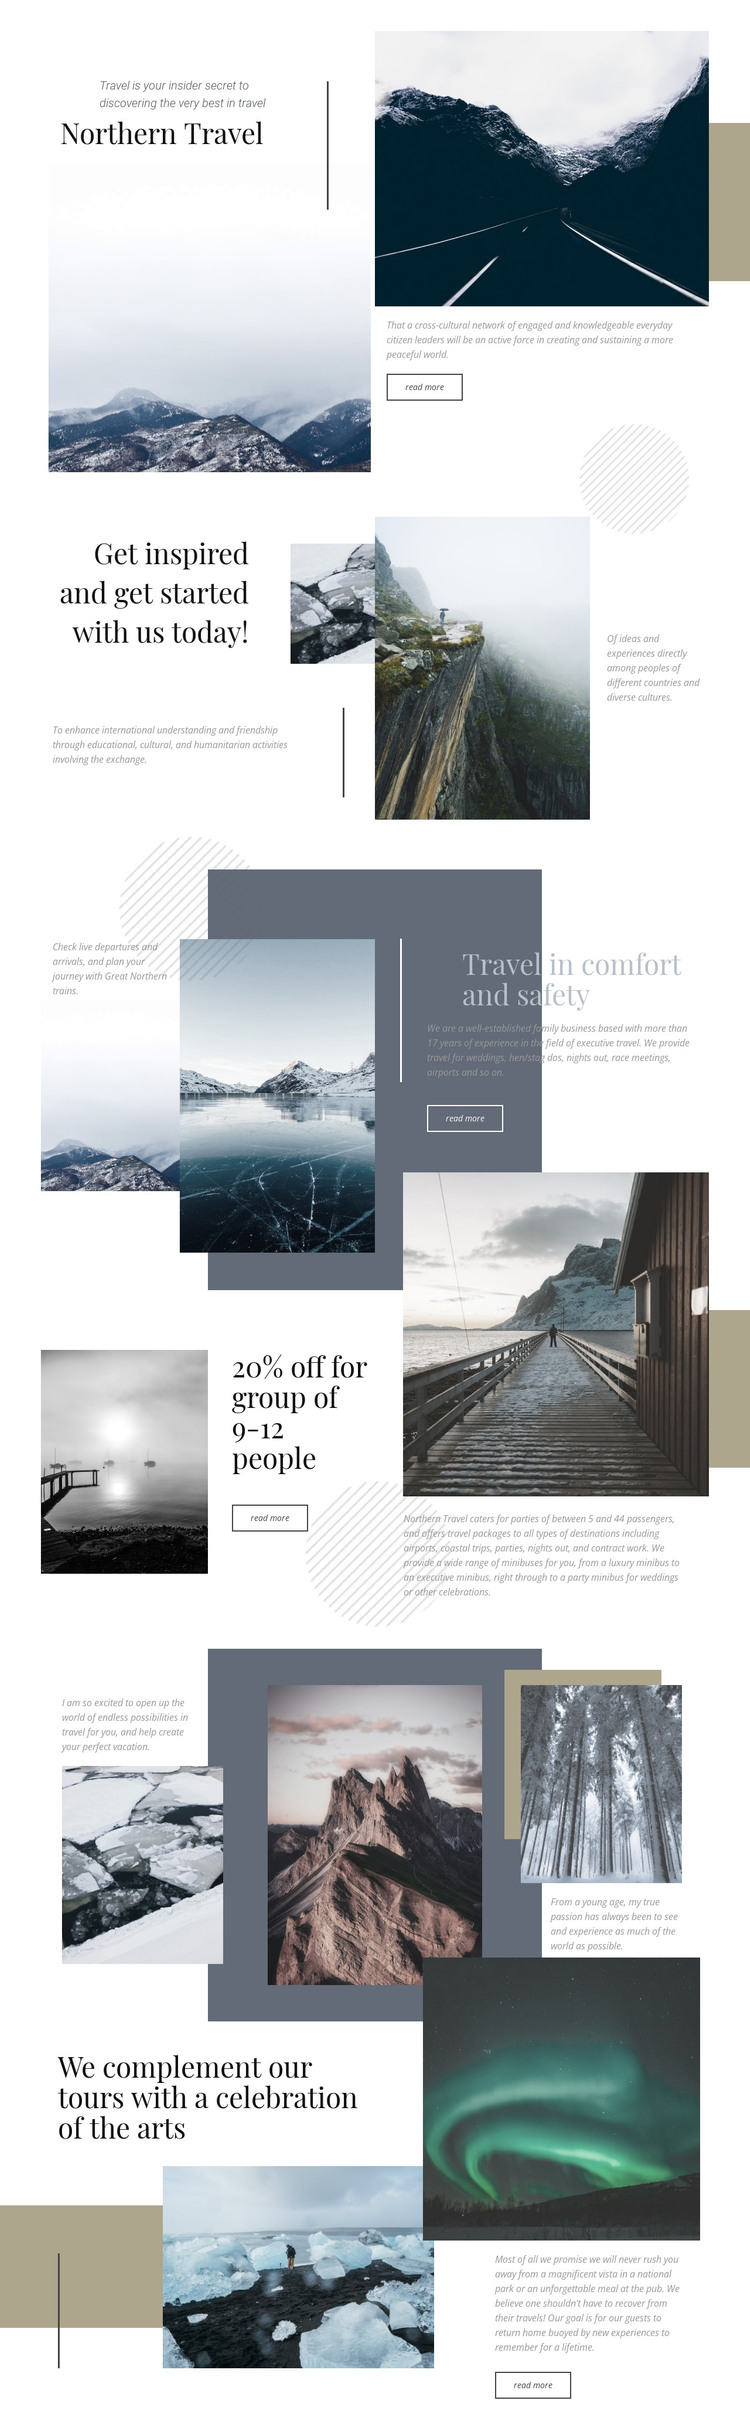 Northern Travel HTML Template